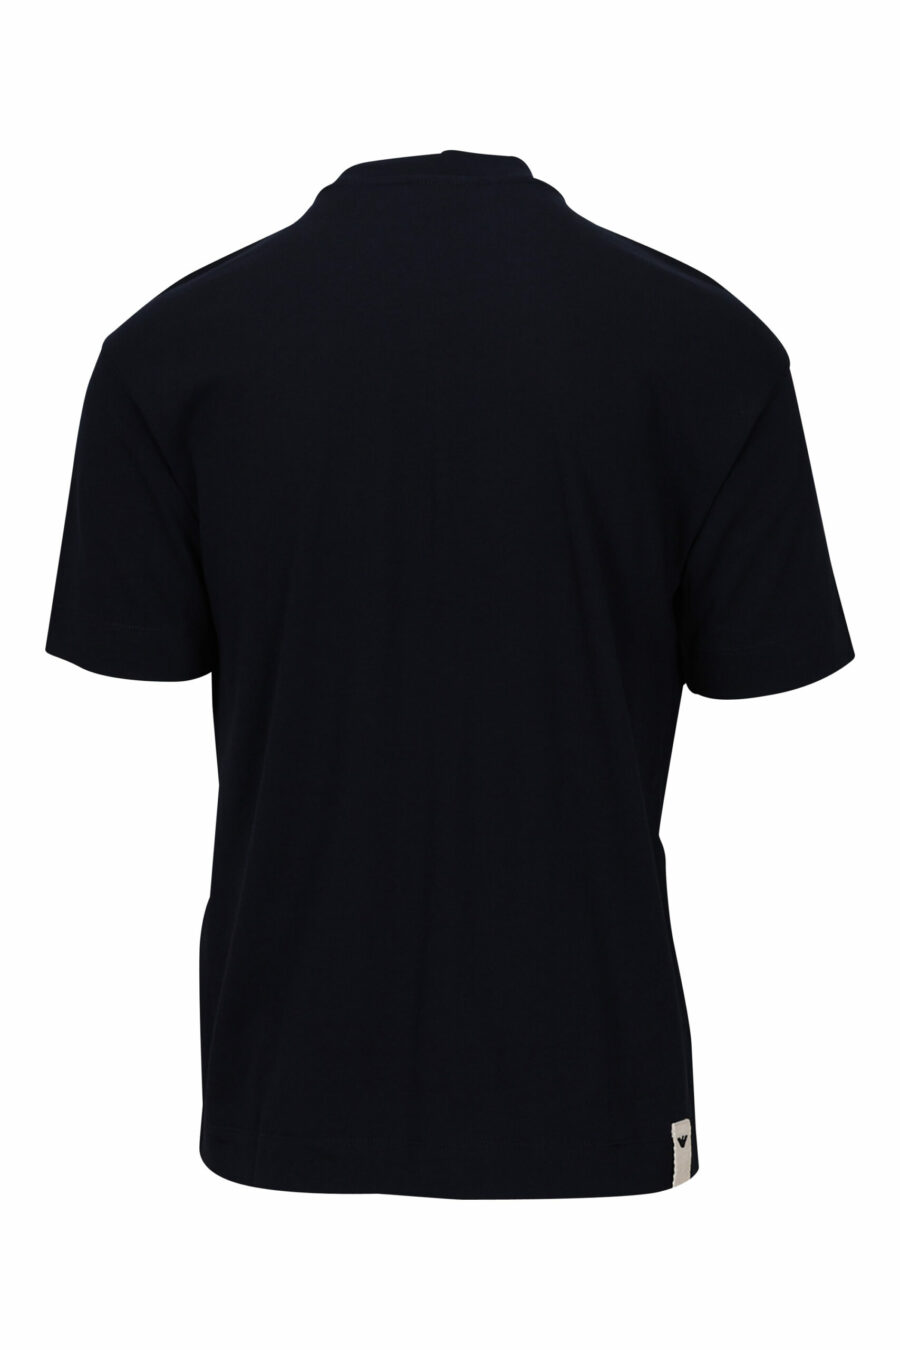 Navy blue T-shirt with centred logo - 8057767459796 1 scaled